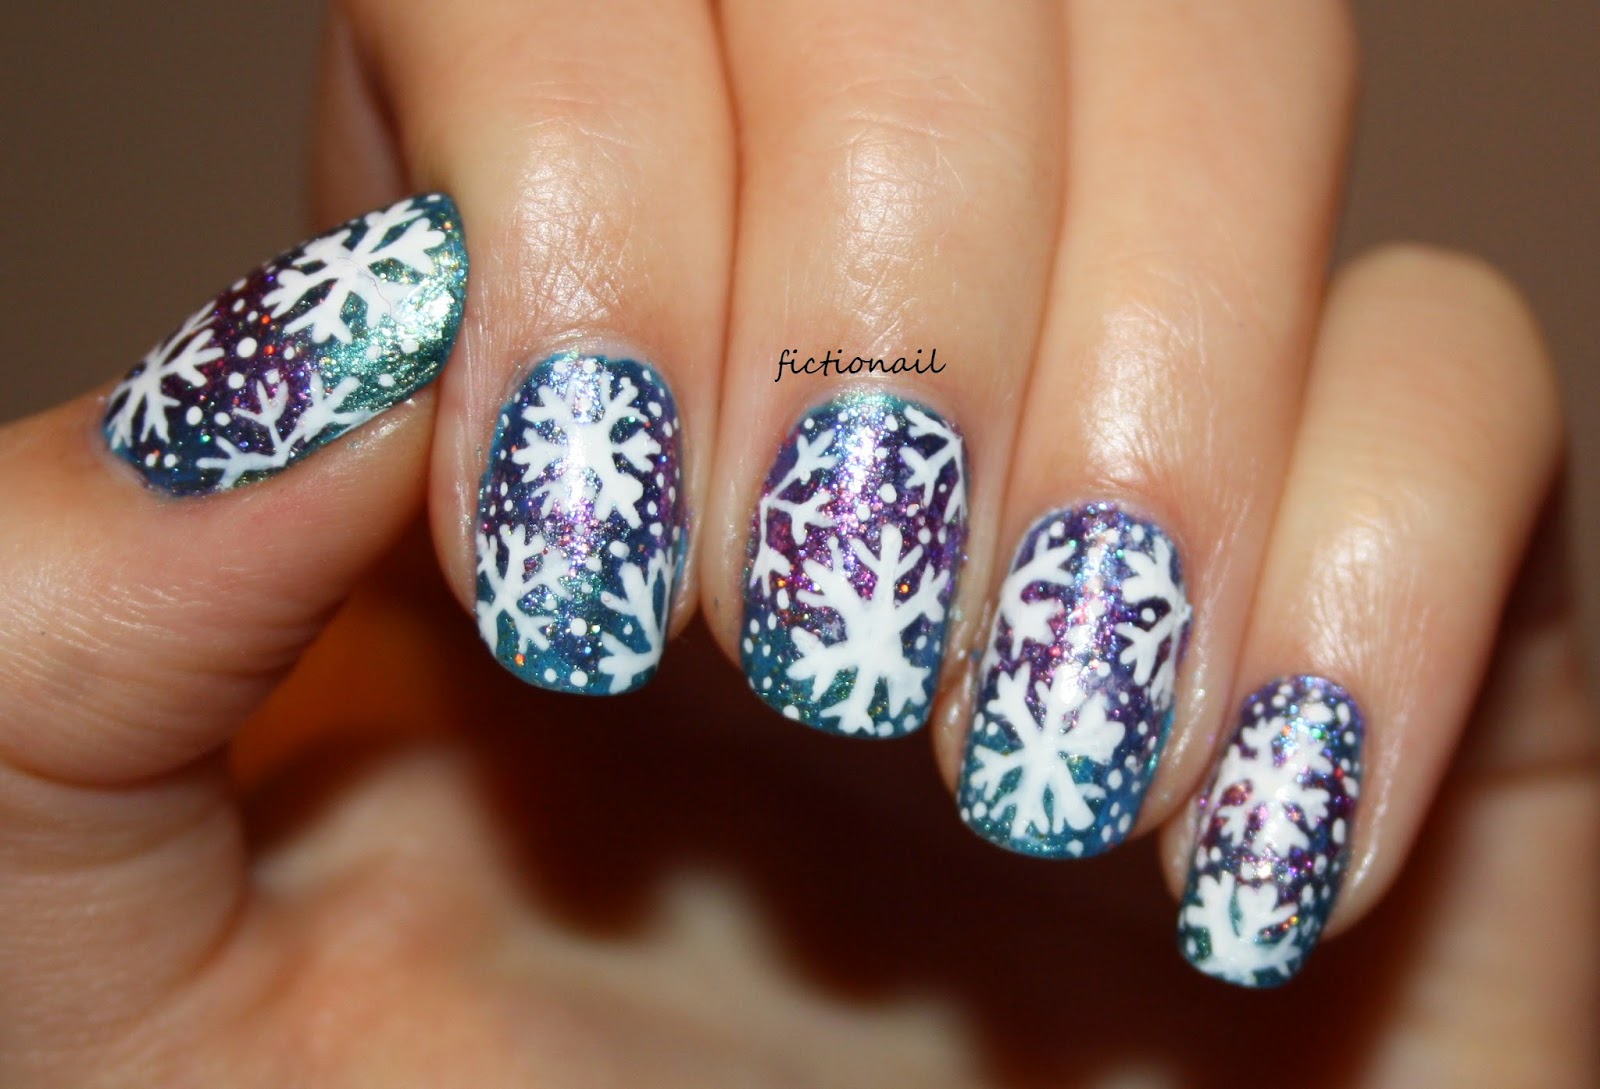 3. Frosty Blue Snowflake Nails - wide 5